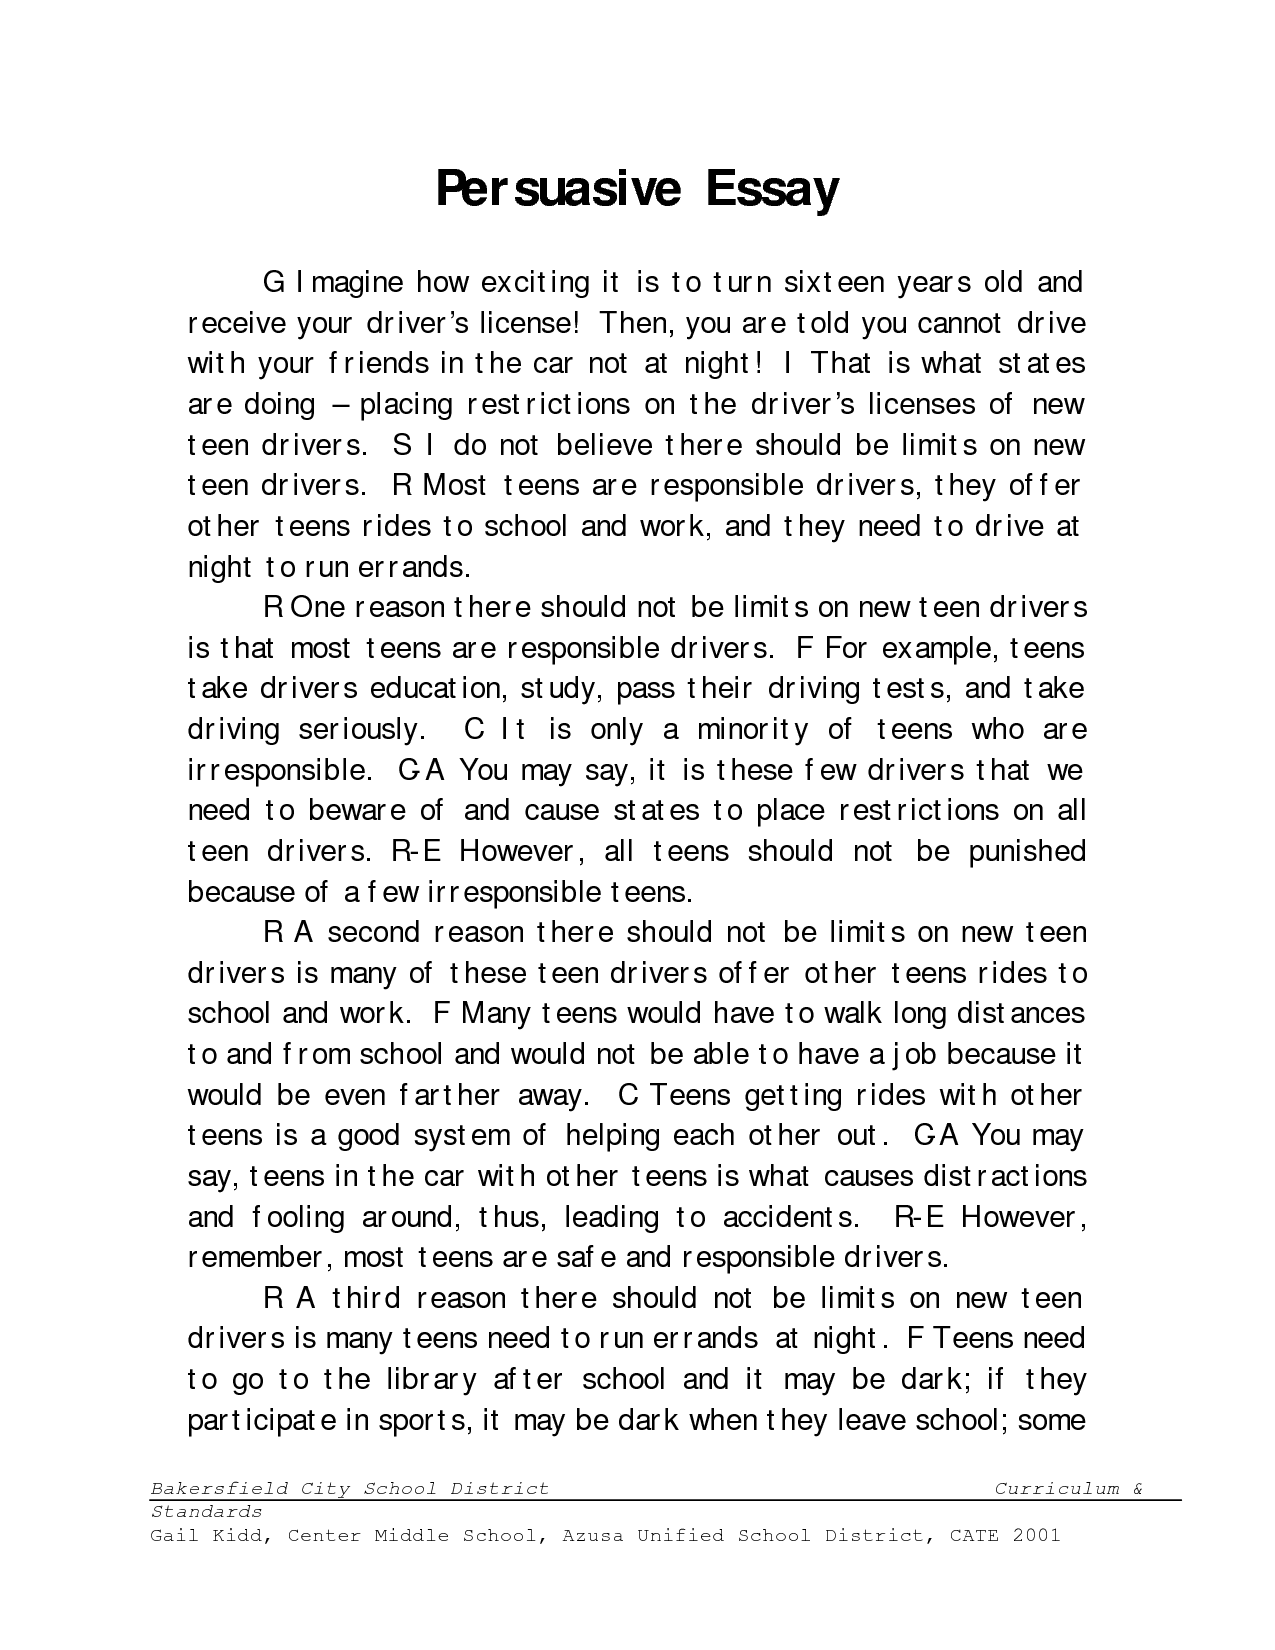 How to Write a Persuasive Essay: Step-by-Step Guide